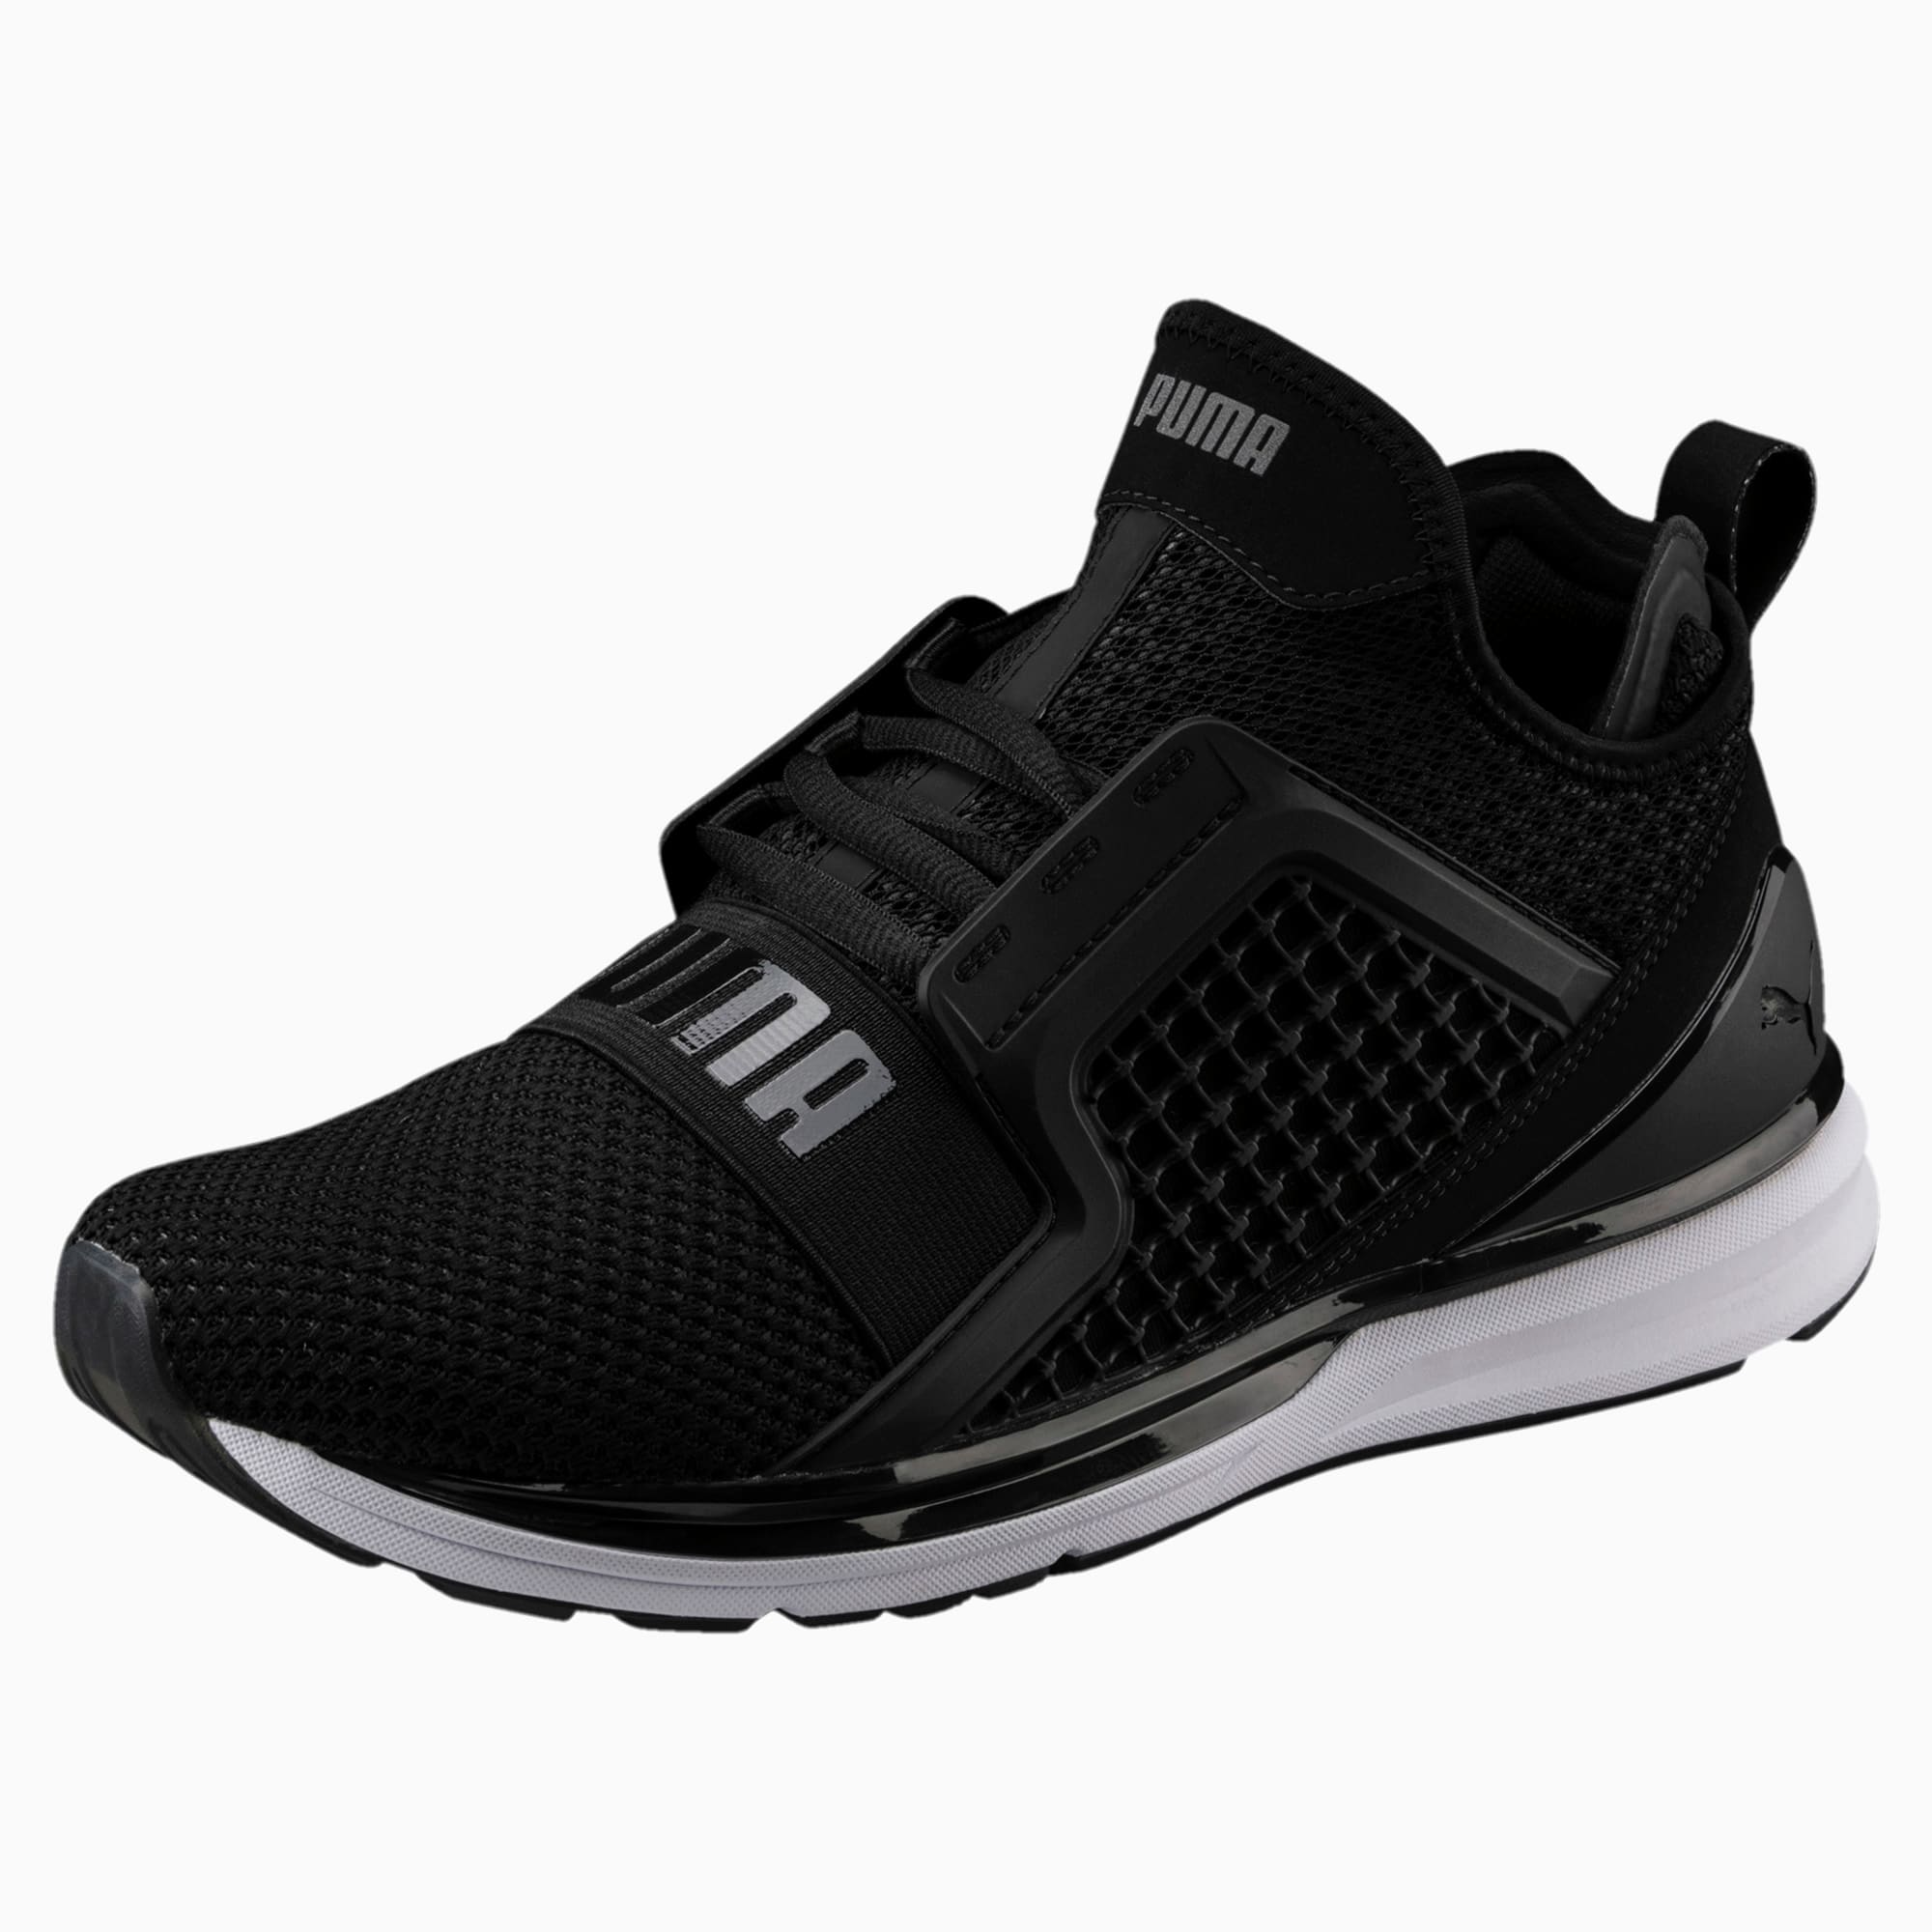 IGNITE Limitless Weave Men's Trainers 